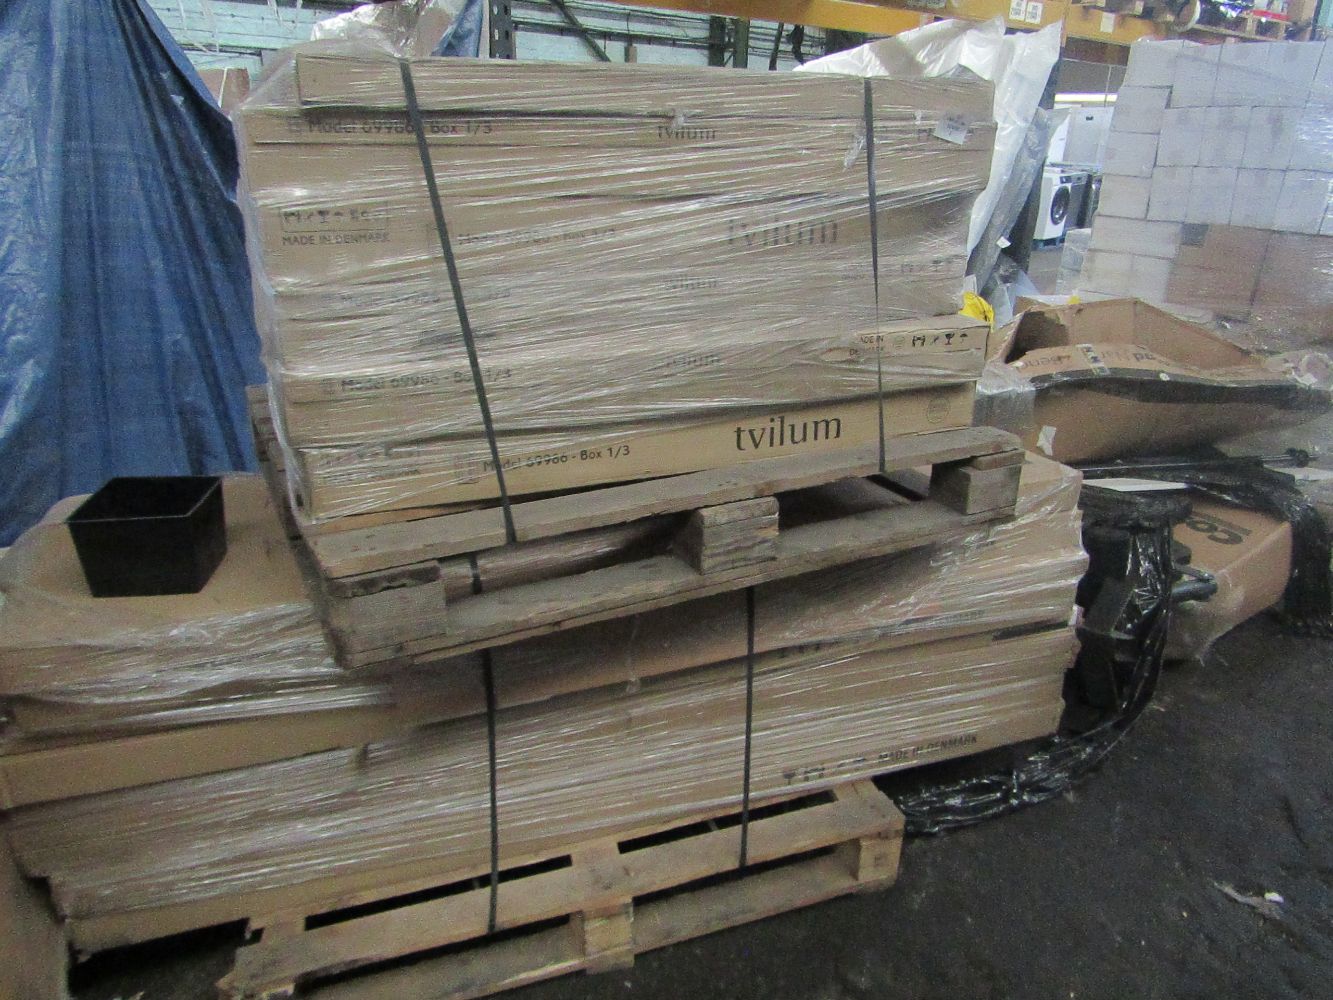 Pallets of overstock and customer returns from B&Q, Howdens and more